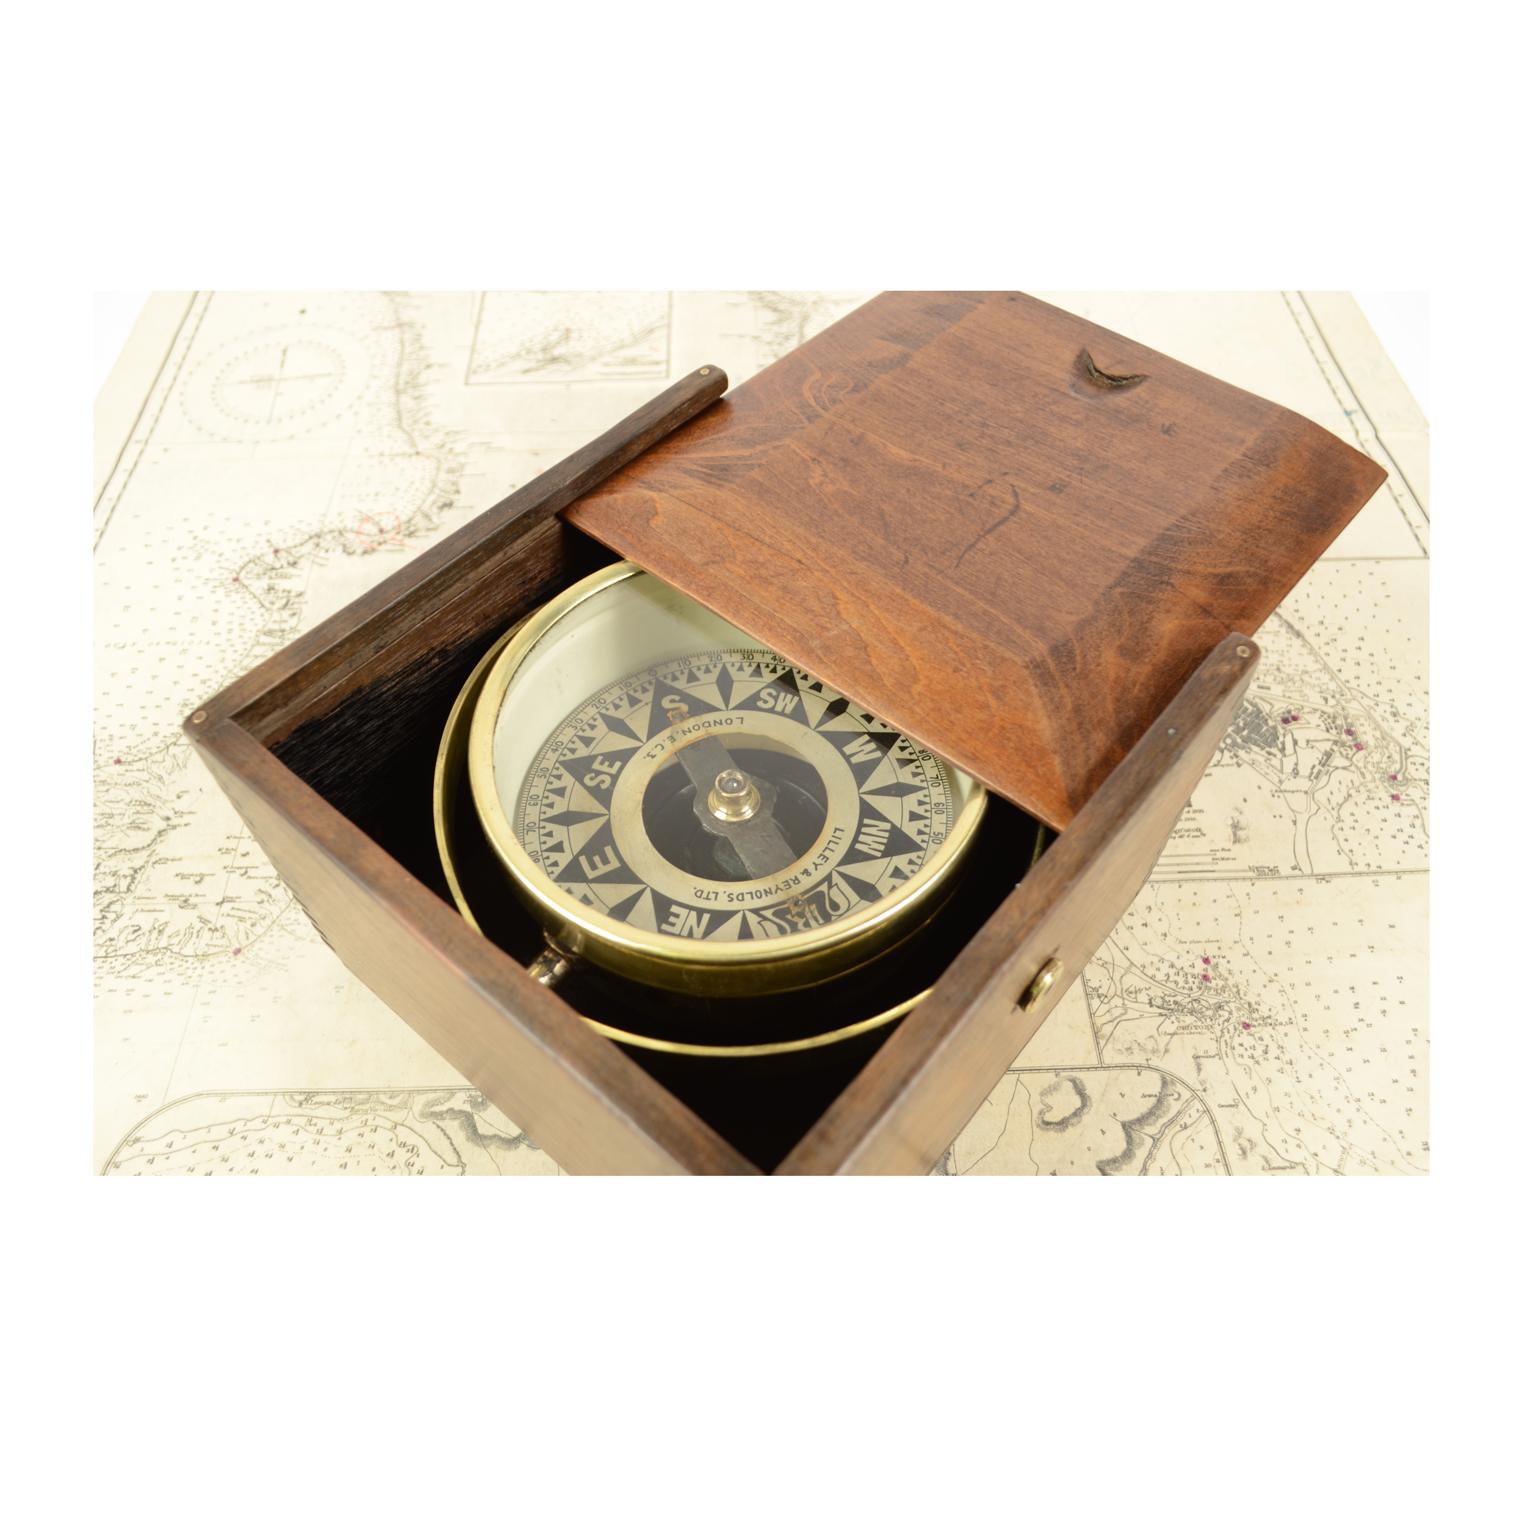 Compass Lilley & Reynolds Ltd London Made in 1930s in Its Original Wooden Box 2